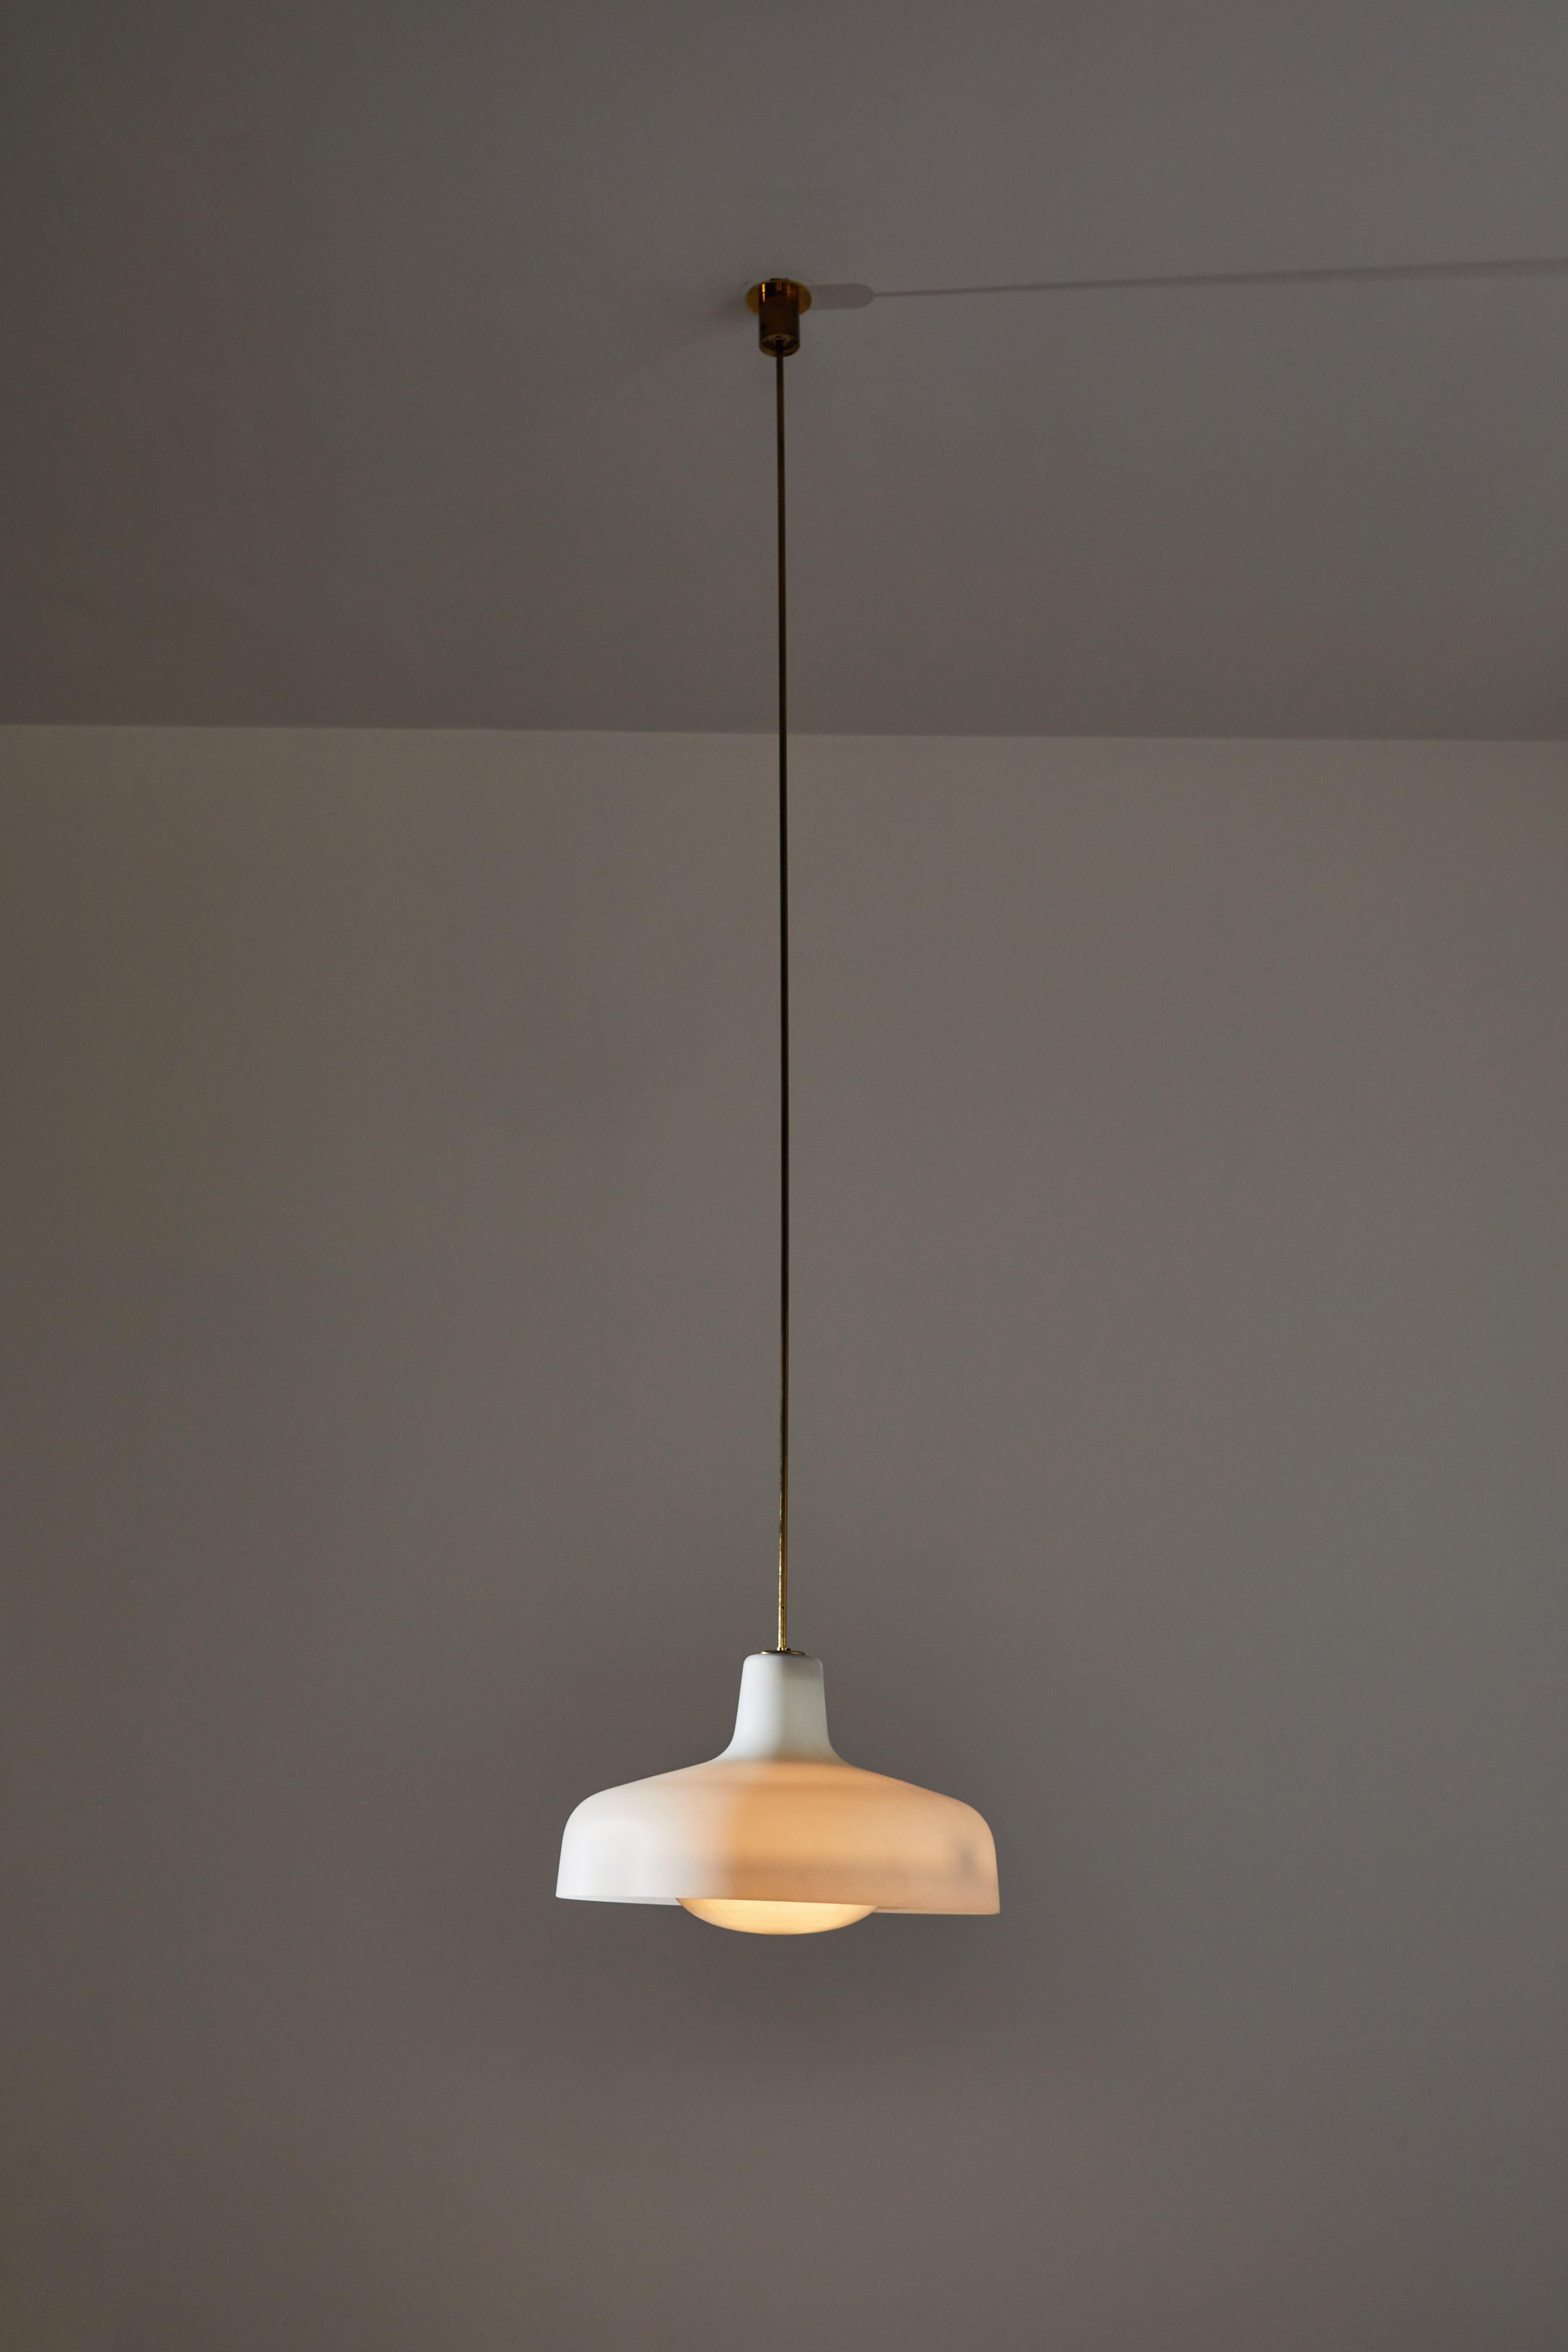 Three Model LS7 Paolina pendant by Ignazio Gardella for Azucena. Designed and manufactured in Italy, 1958. Brass, glass. Original canopies and custom brass ceiling plate. We recommend one E27 75 watt maximum bulb. Single bulb provided as a one time